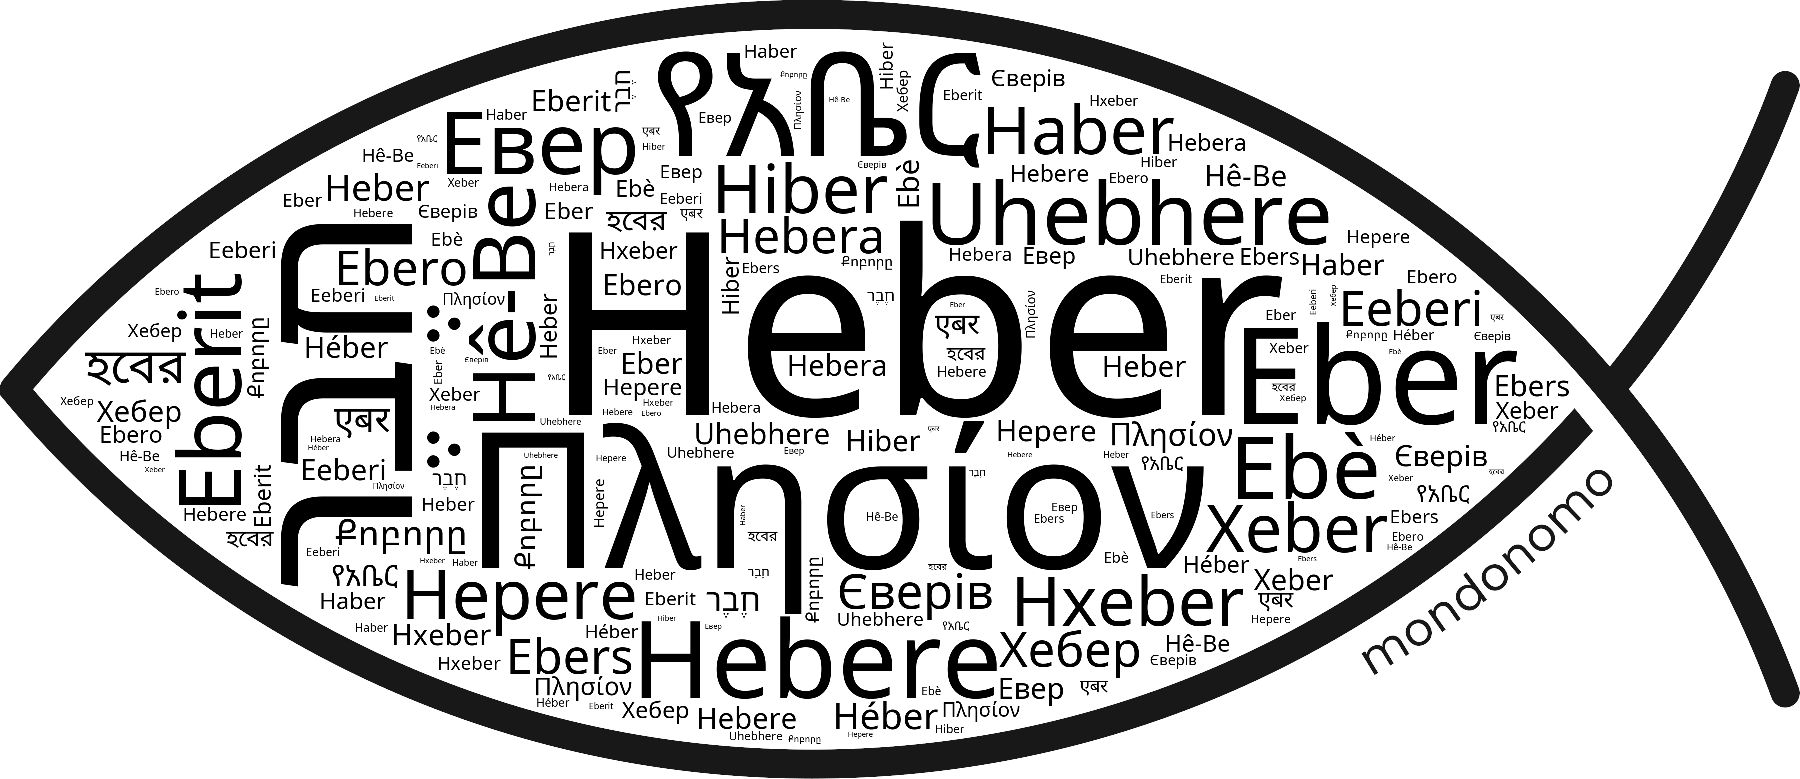 Name Heber in the world's Bibles